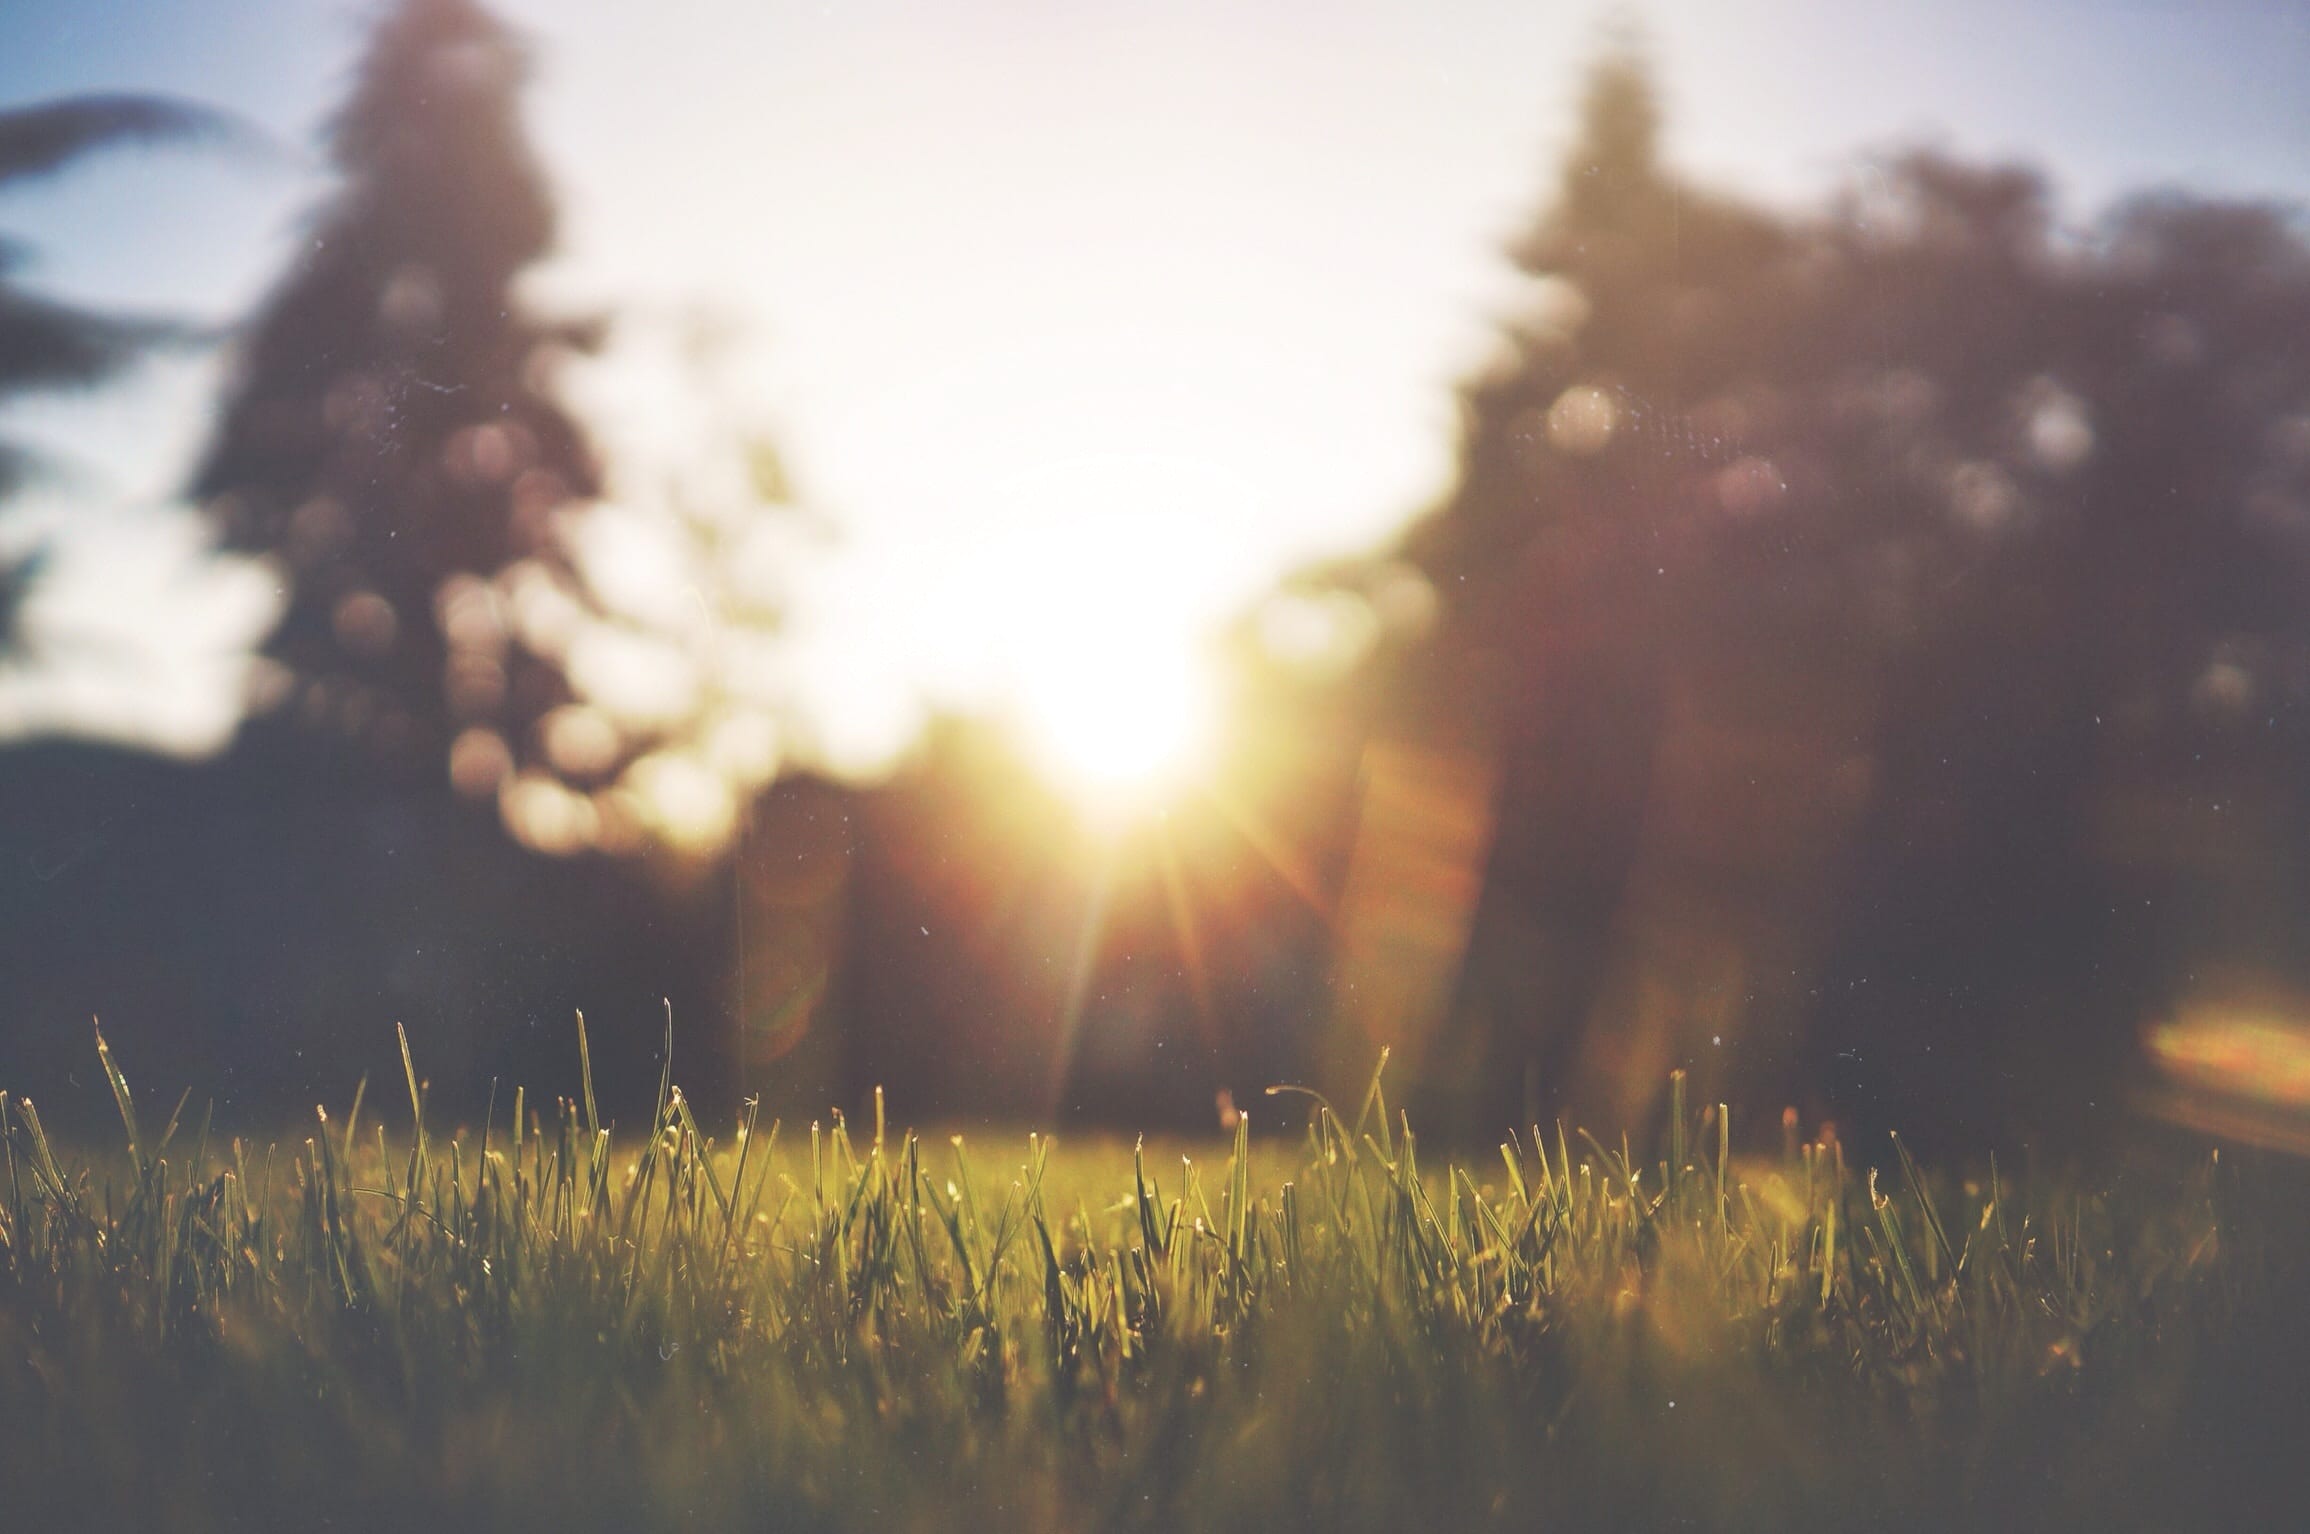 Soft focus shot of grass and trees with morning sun; image by Jake Givens, via Unsplash.com.